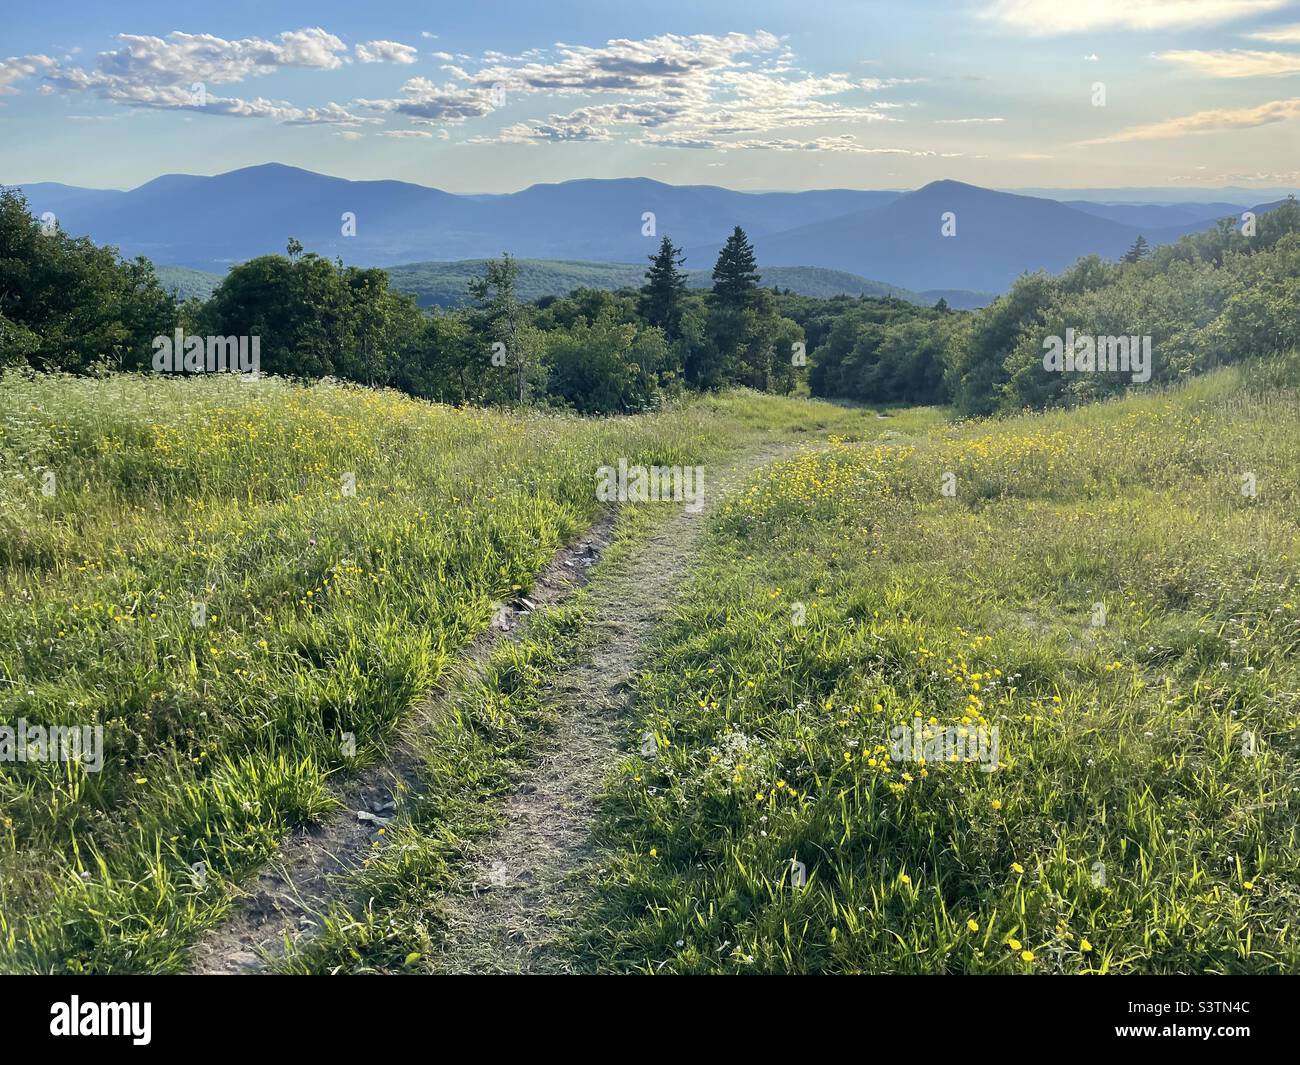 A hiking trail lead up a mountain side along wild flower blooms in southern Vermont. Stock Photo